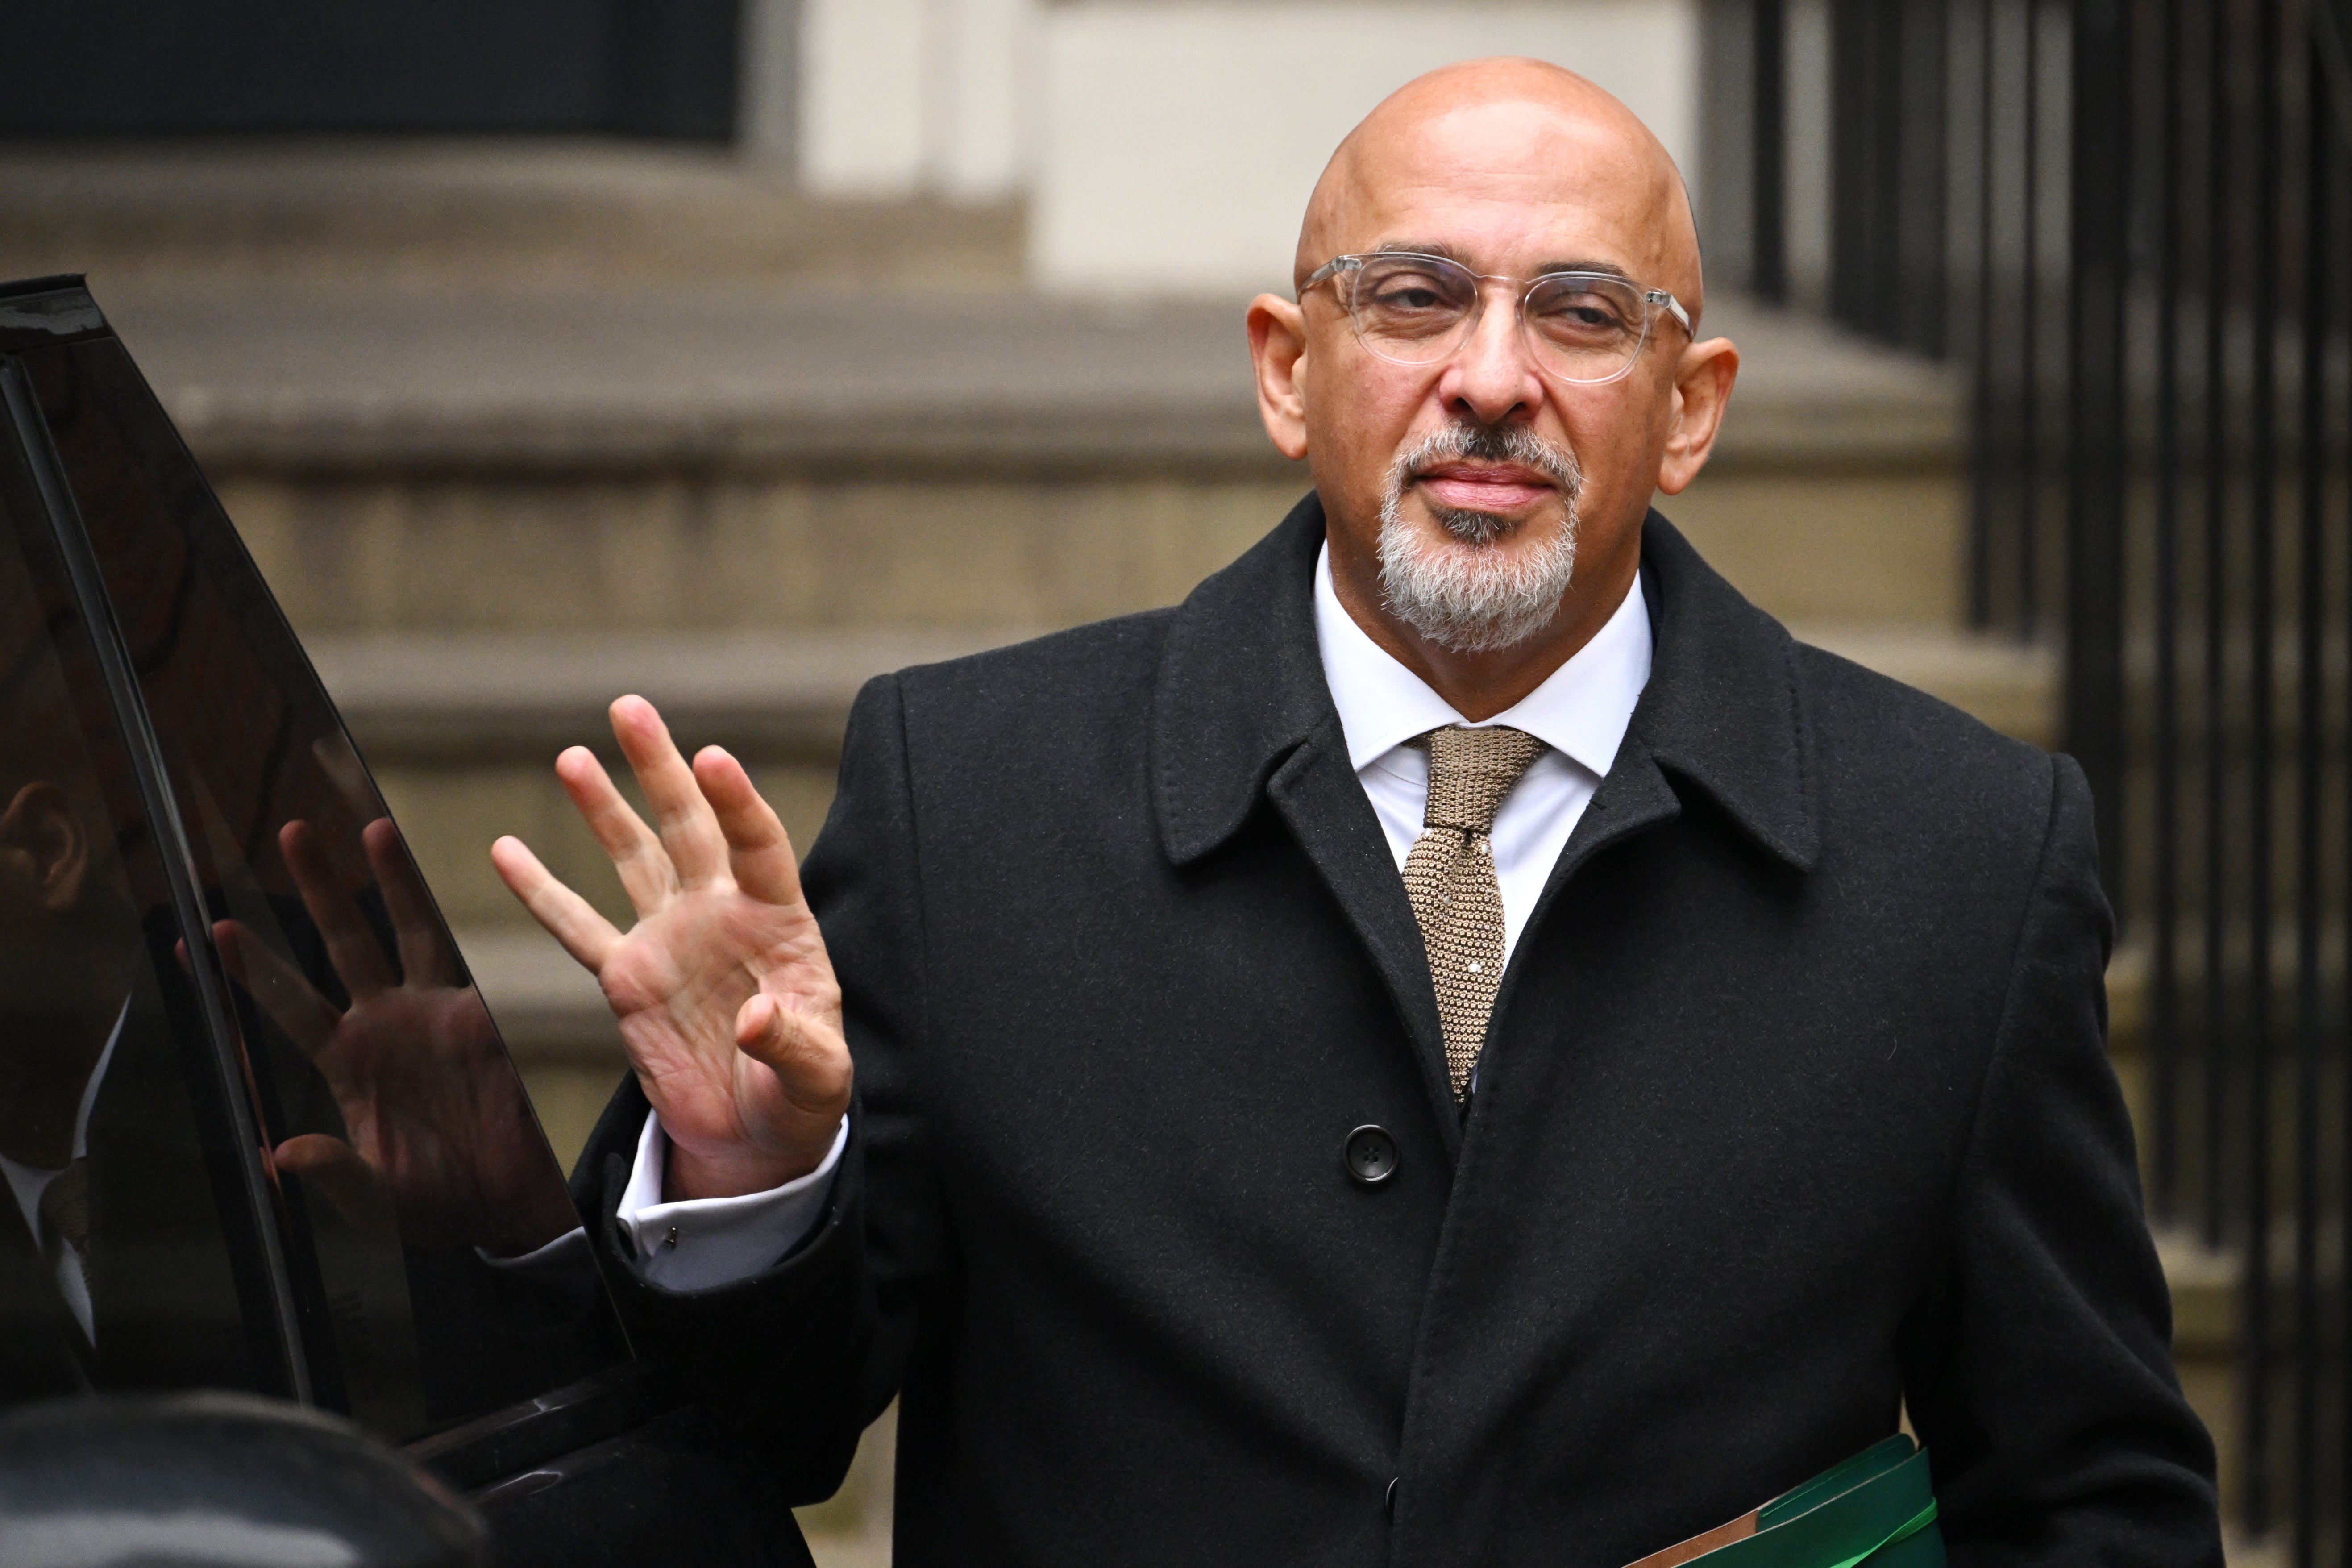 Nadhim Zahawi has so far resisted calls to resign his position